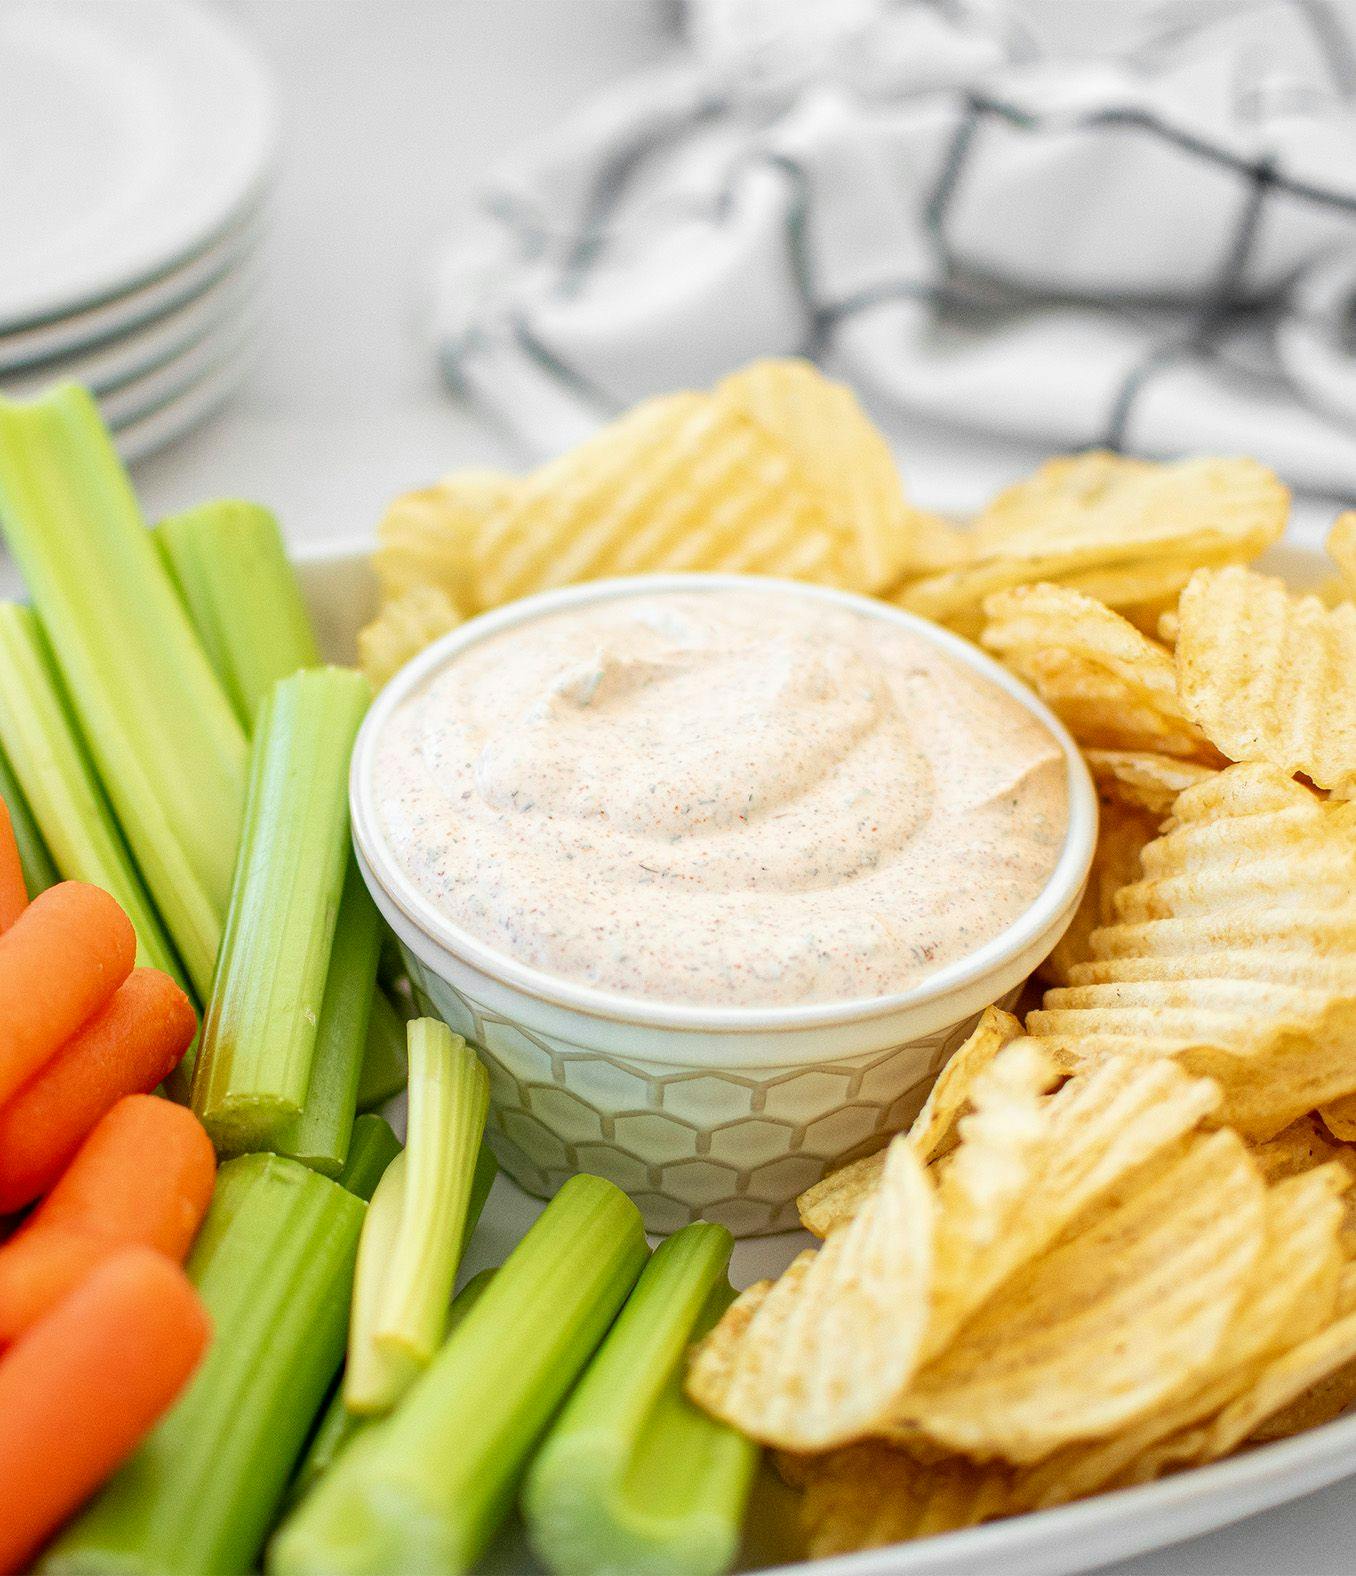 Organic Buffalo Ranch Dip with chips, celery and carrots on a serving dish.